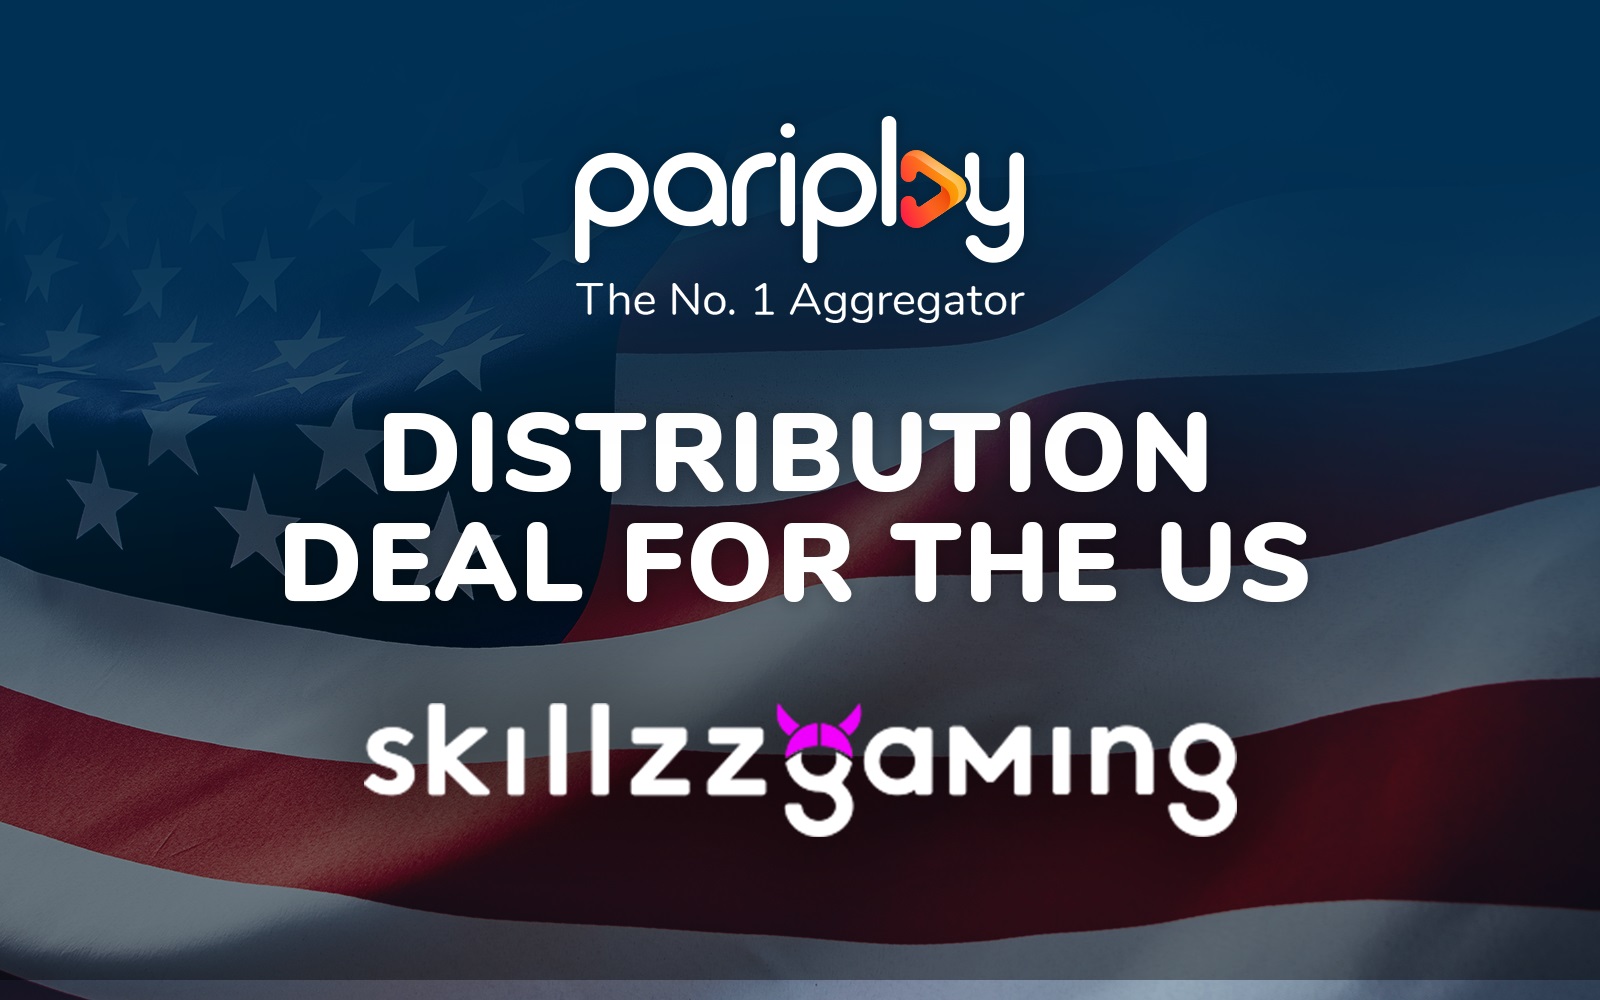 Pariplay to exclusively distribute Skillzzgaming content in US